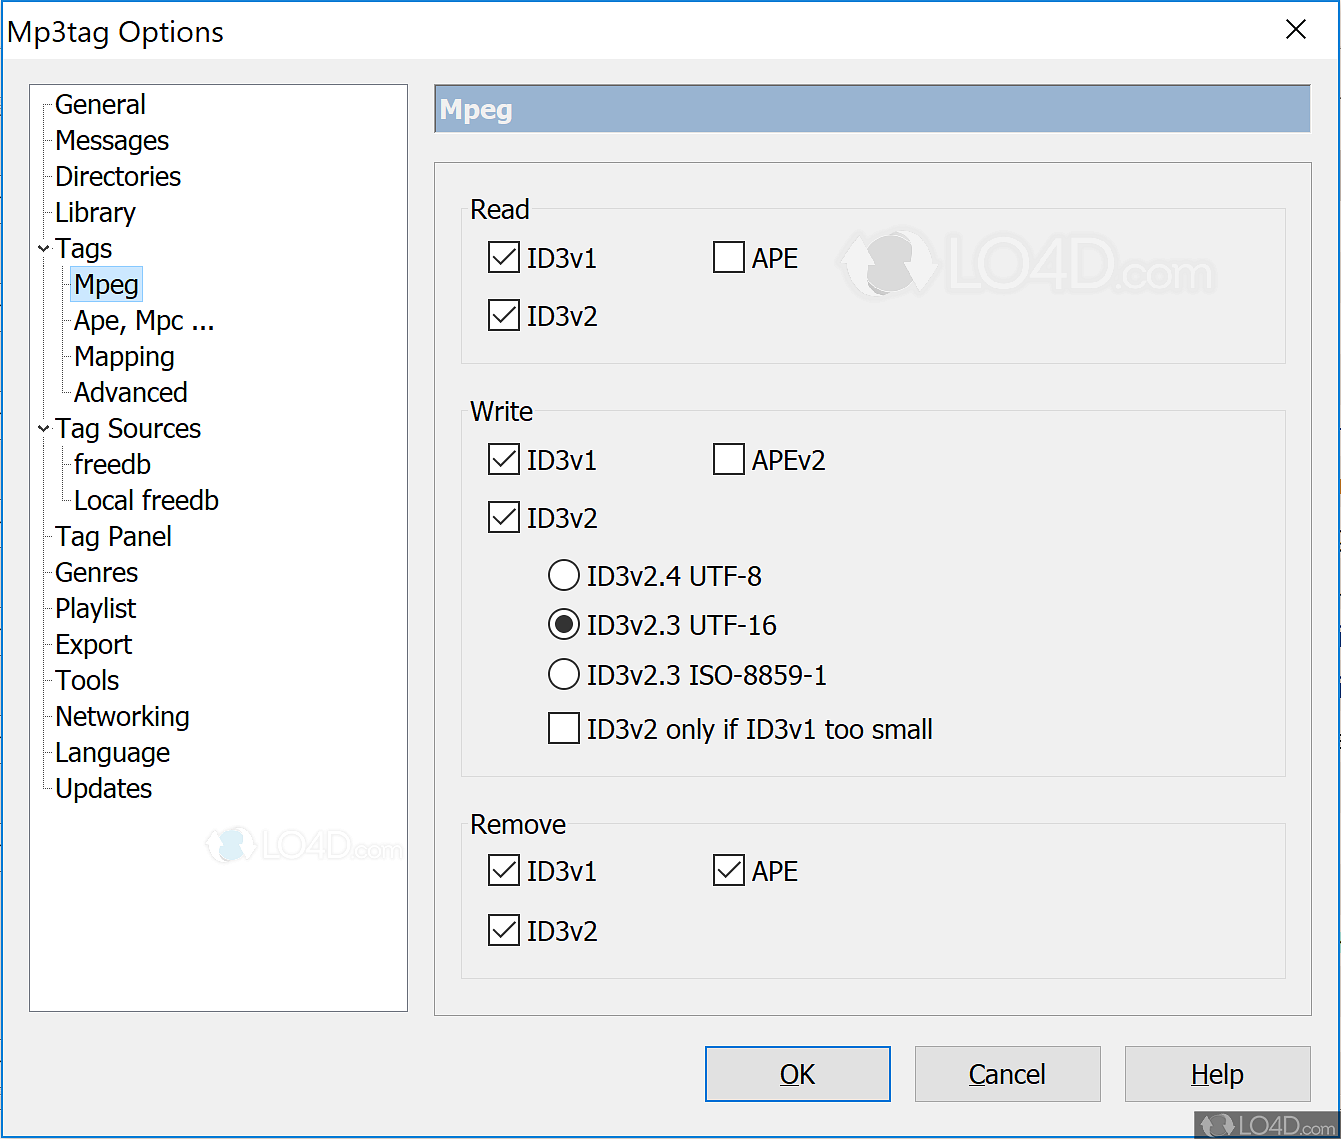 download mp3 tag editor for windows 7